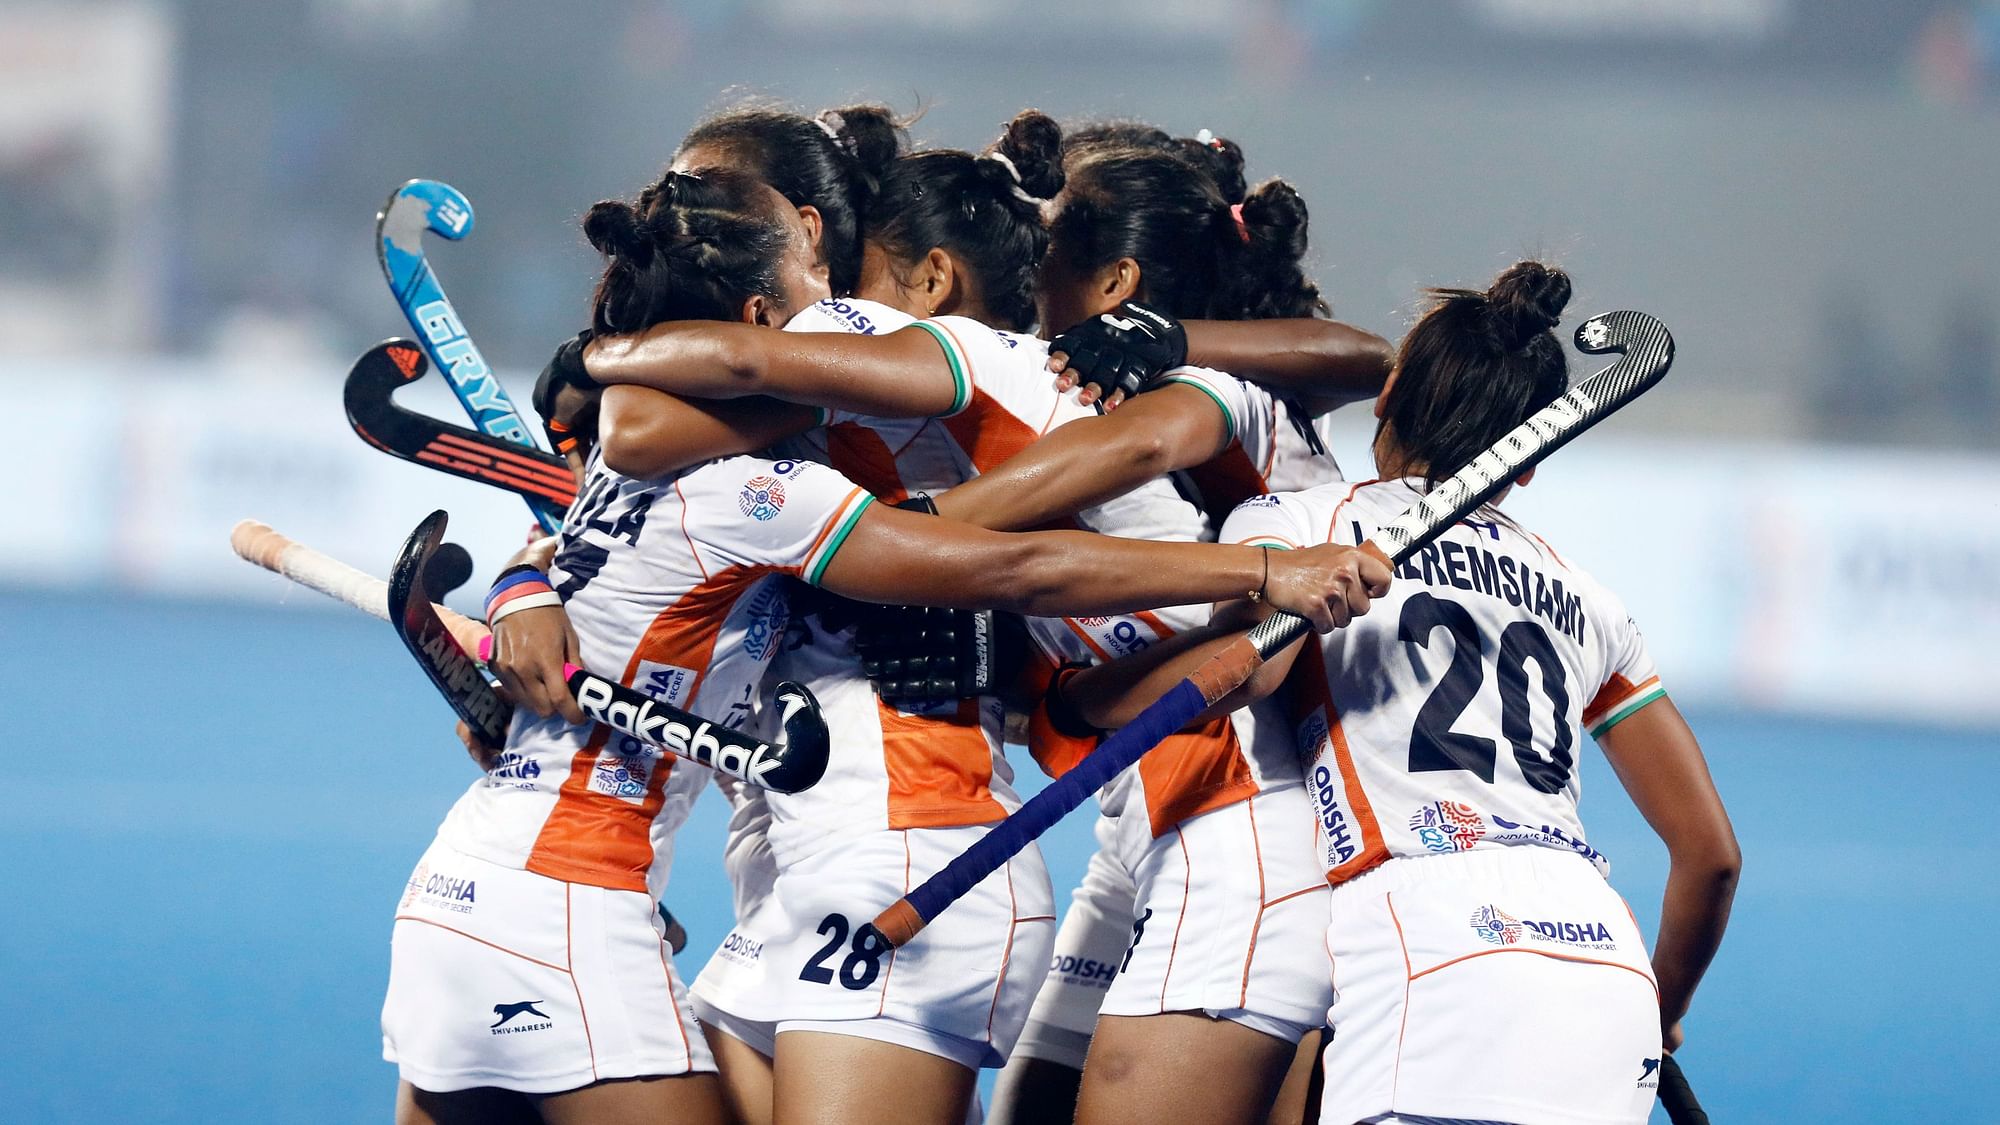 India’s women’s hockey team has qualified for the 2020 Tokyo Olympics.